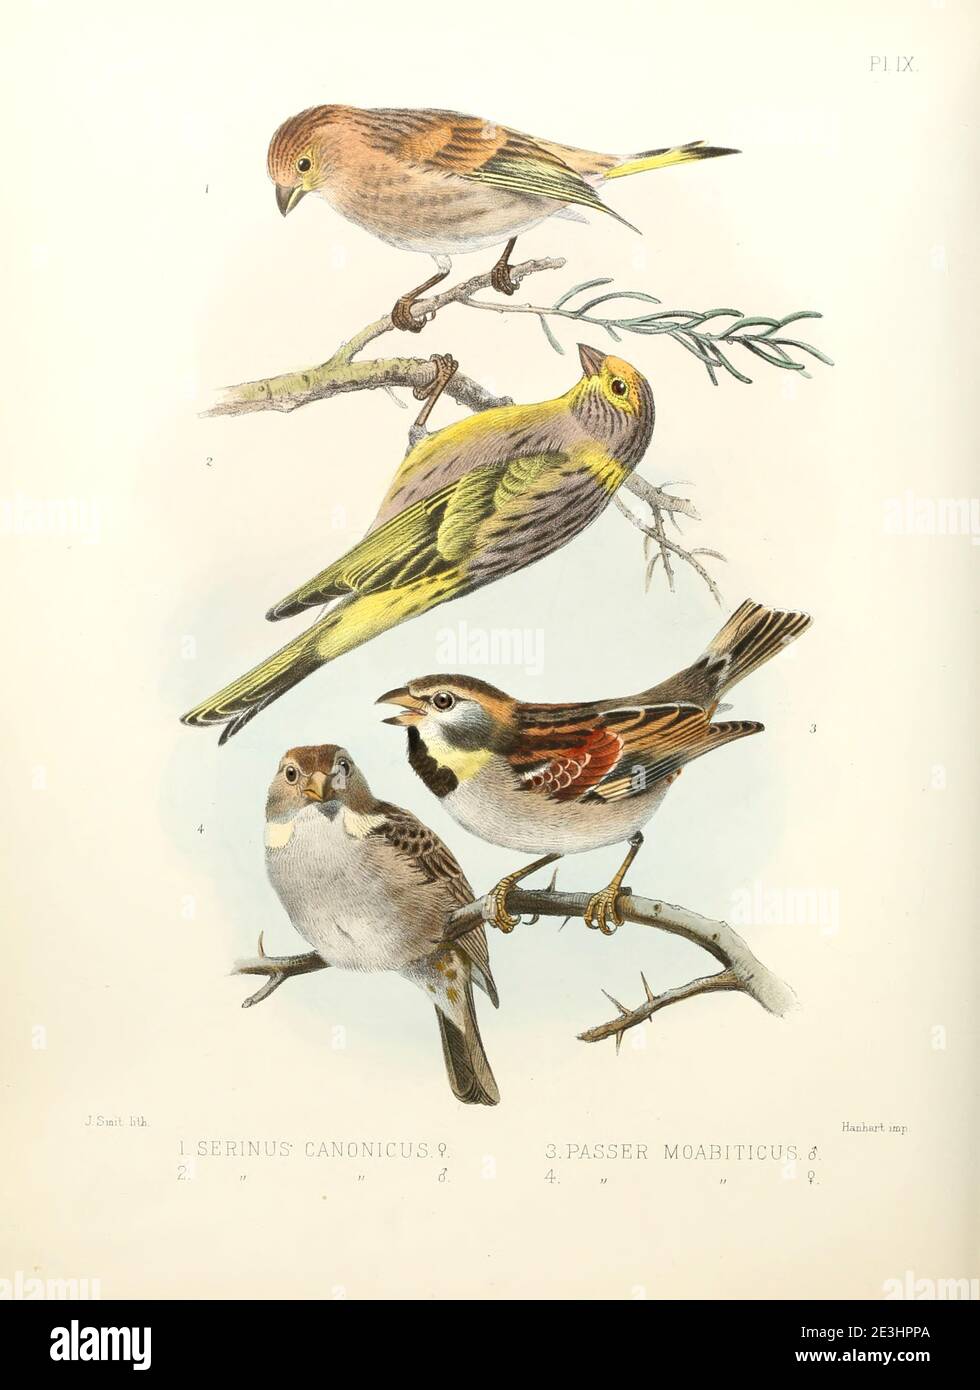 Male and female finches (Serinus sp. [Here as Serinus canonicus] Top and  Dead Sea sparrow (Passer moabiticus) Bottom From the survey of western Palestine. The fauna and flora of Palestine by Tristram, H. B. (Henry Baker), 1822-1906 Published by The Committee of the Palestine Exploration Fund, London, 1884 Stock Photo